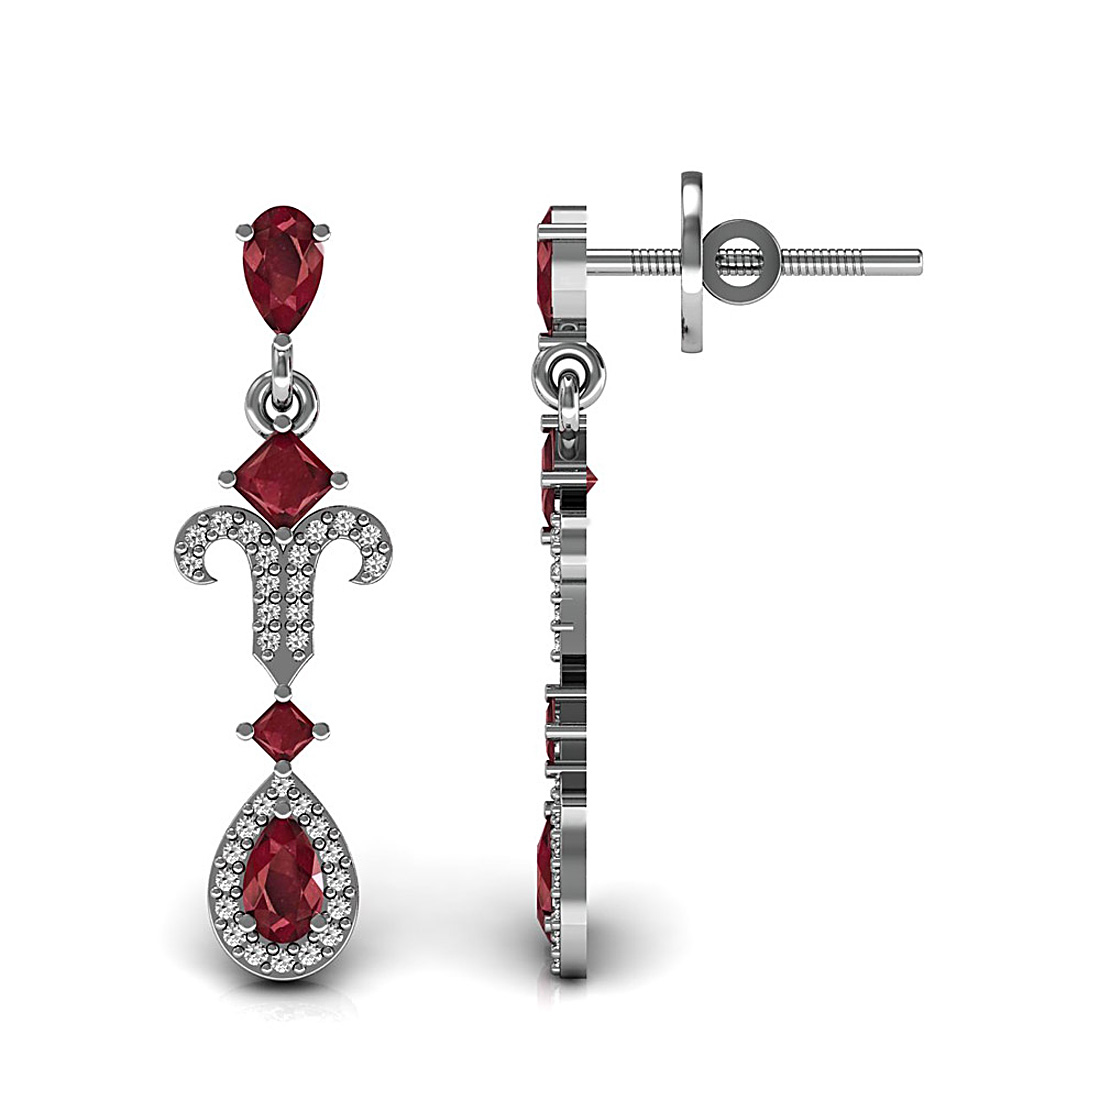 Dangle earrings made in 18k solid white gold and adorned with natural ruby and real diamond.